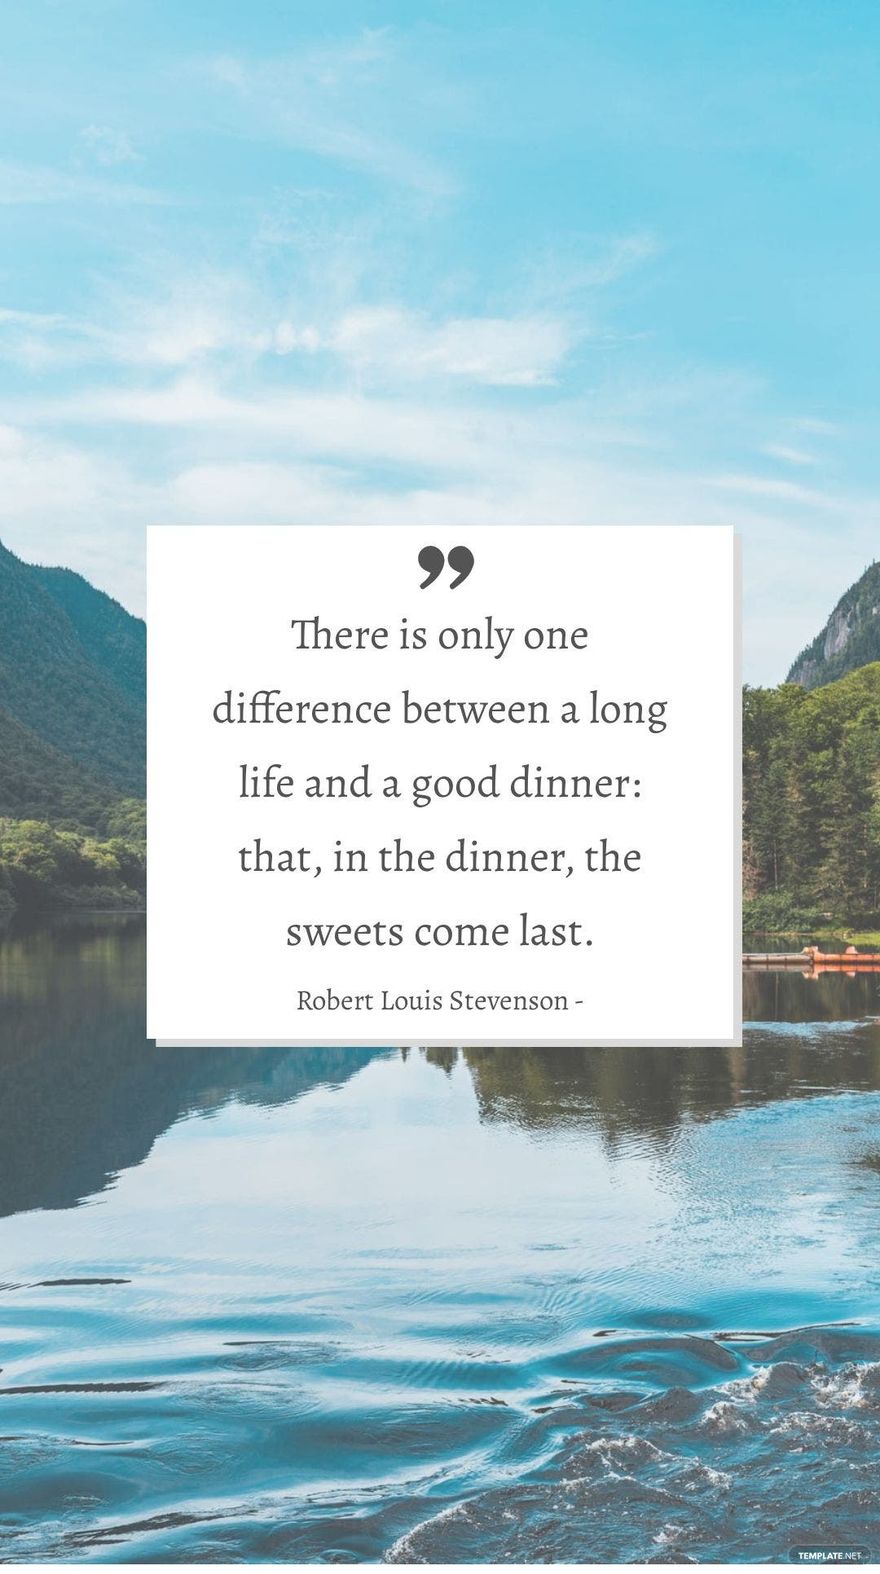 Robert Louis Stevenson - There is only one difference between a long life and a good dinner: that, in the dinner, the sweets come last.